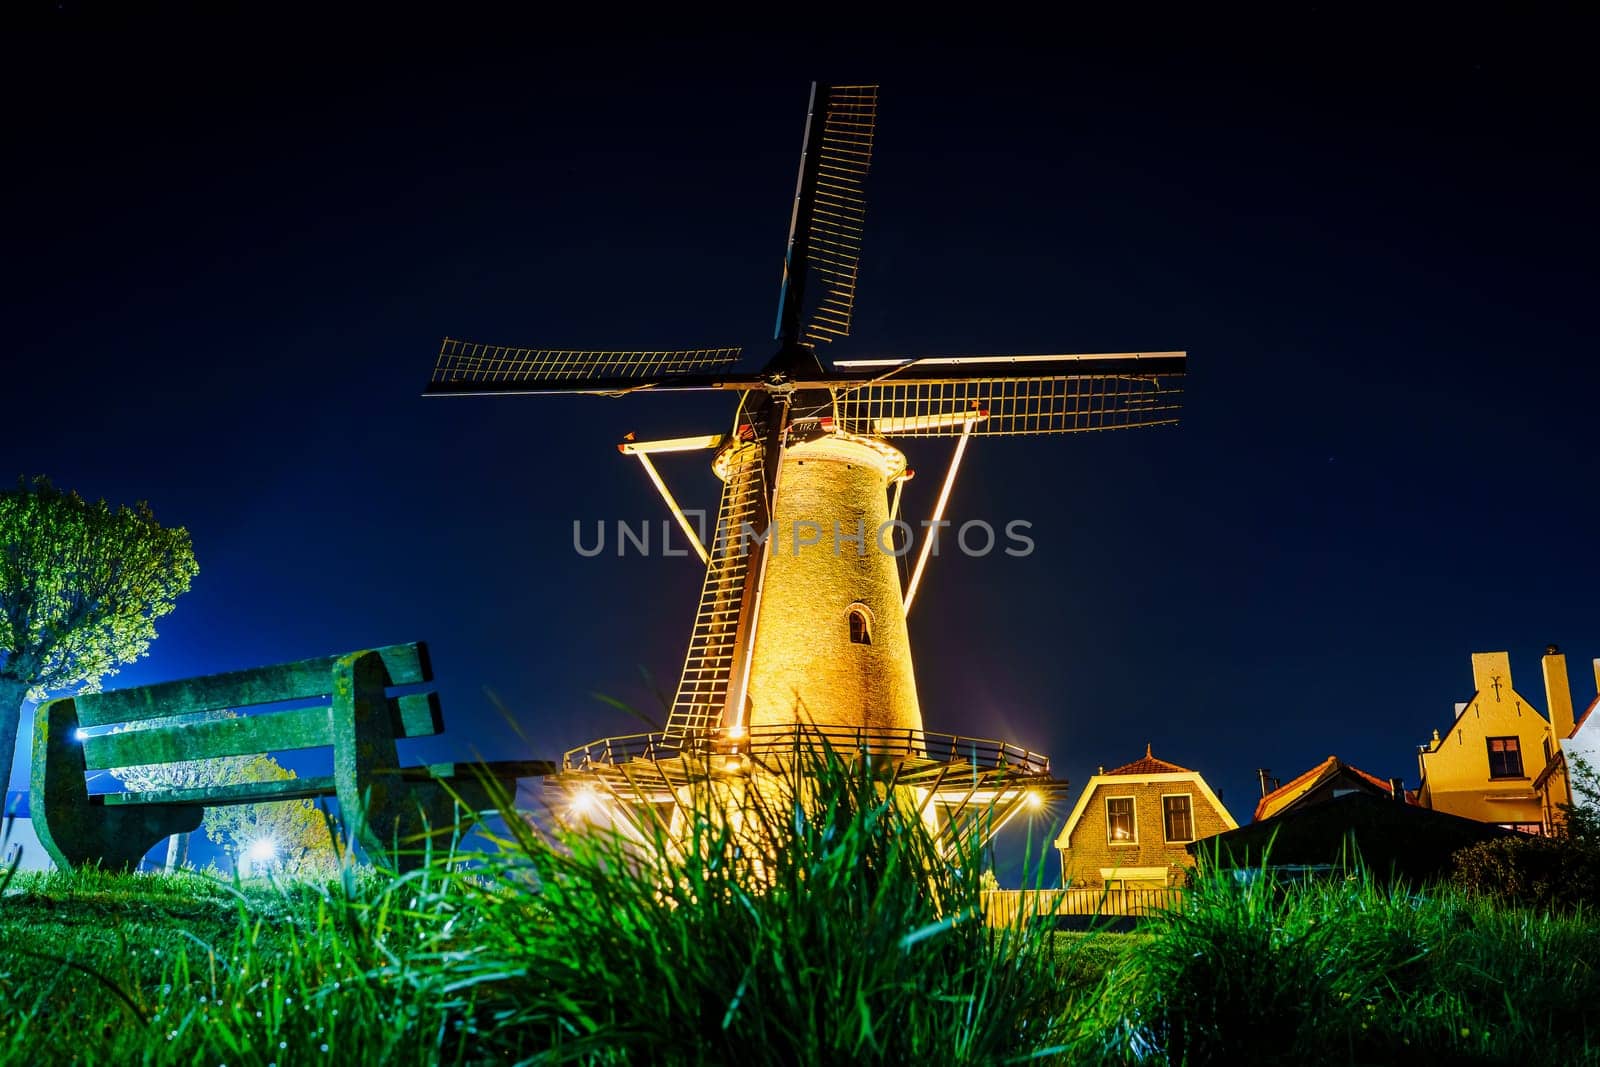 Night View of an Old Windmill with Lights in Zierikzee, Netherlands by PhotoTime